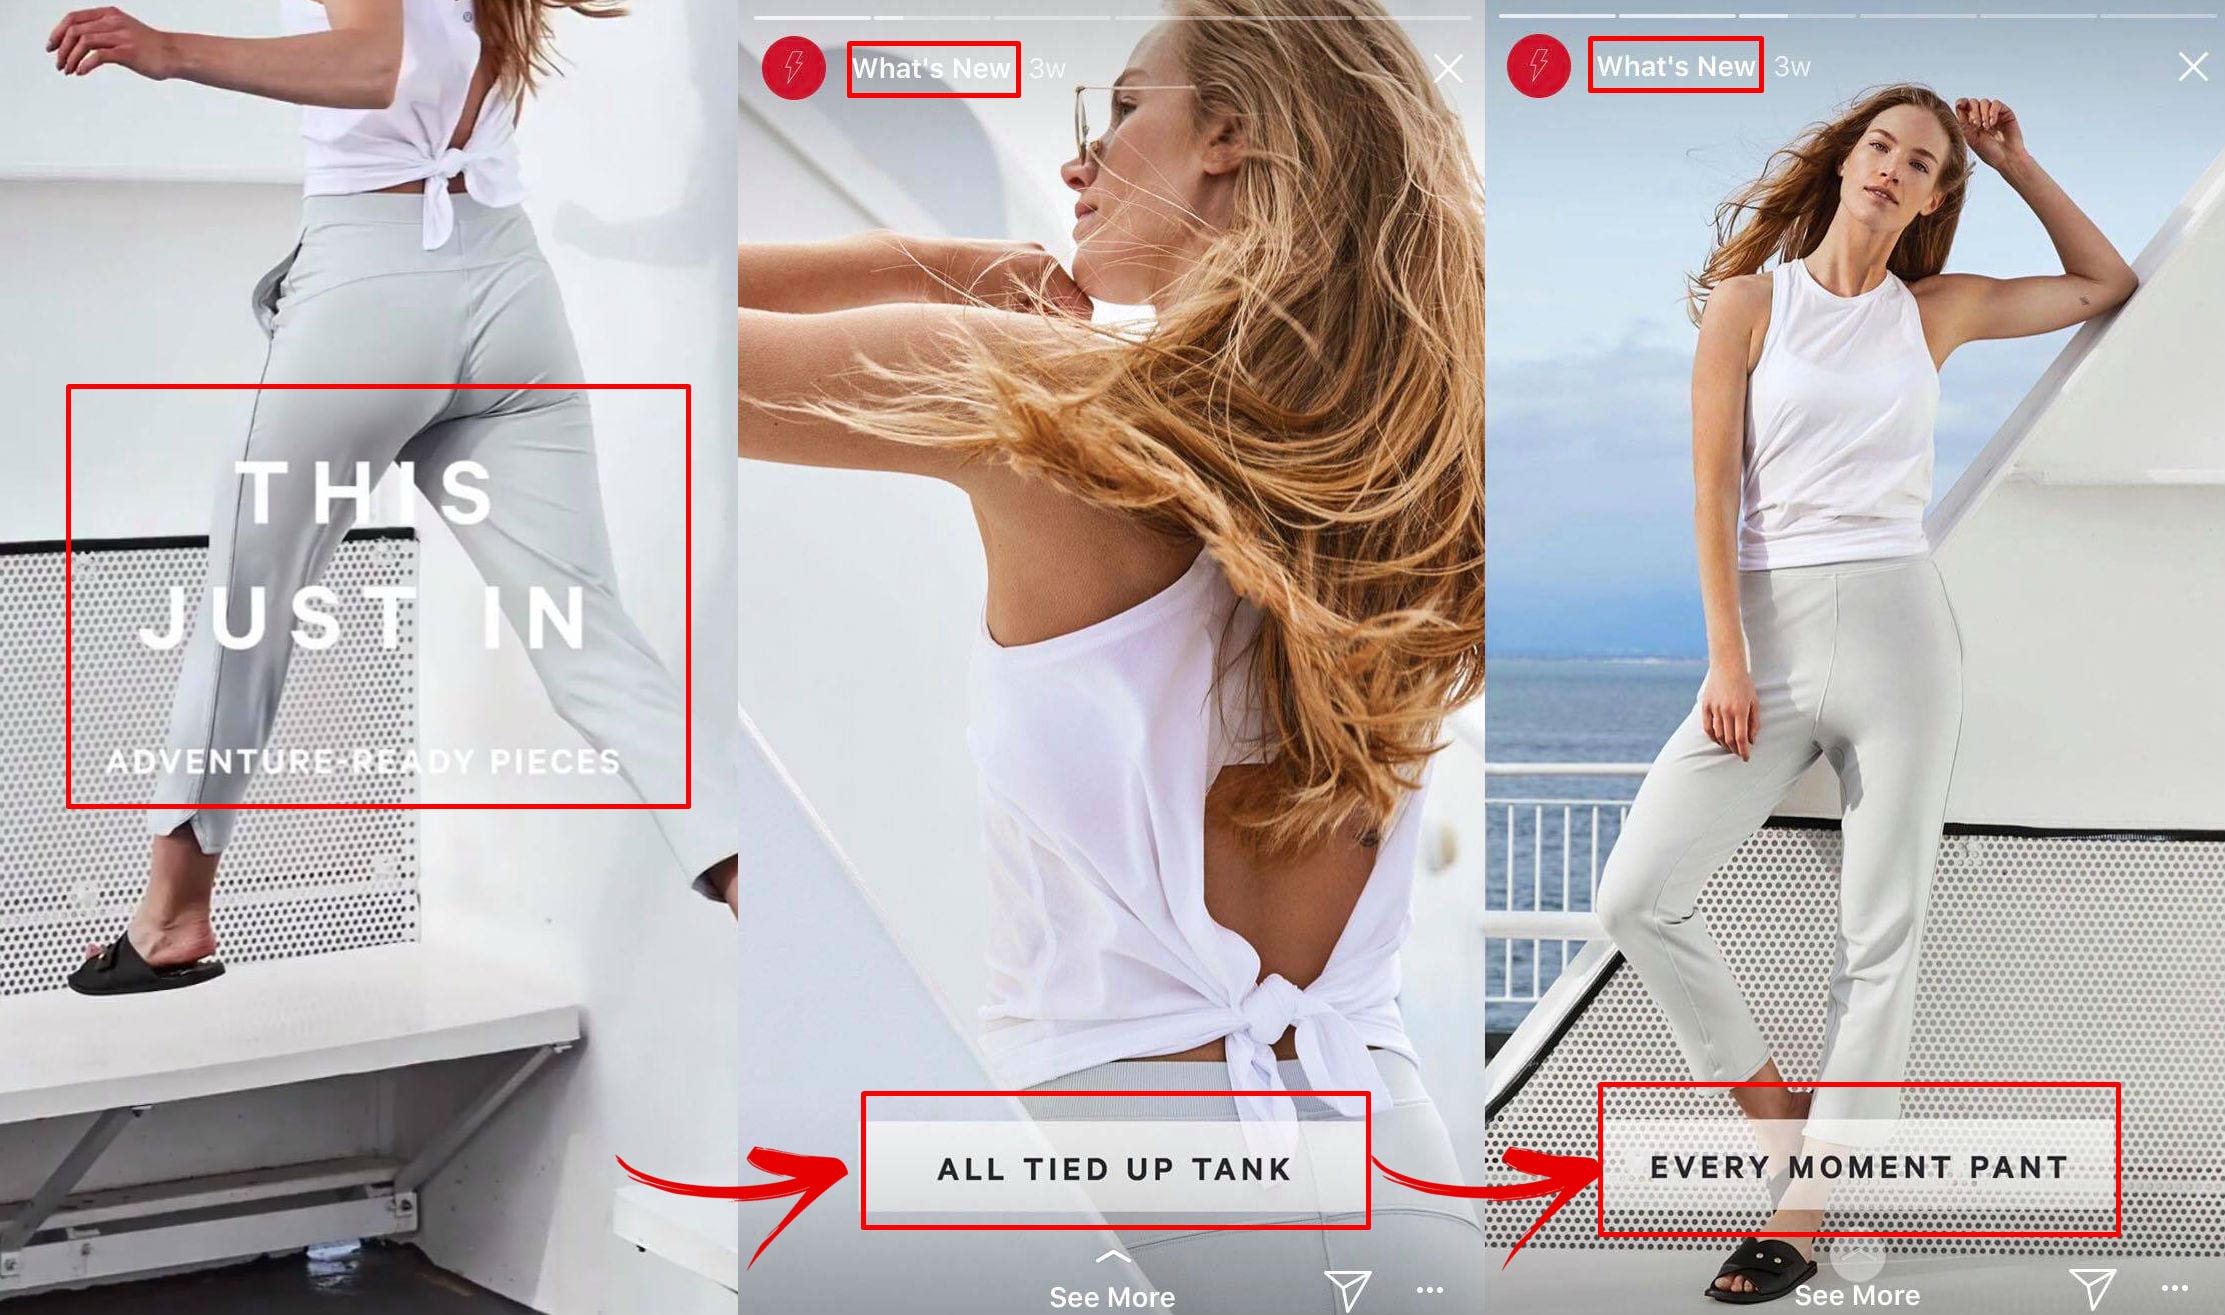 whats new LULULEMON - Cracking Instagram's Code with Ephemeral Content